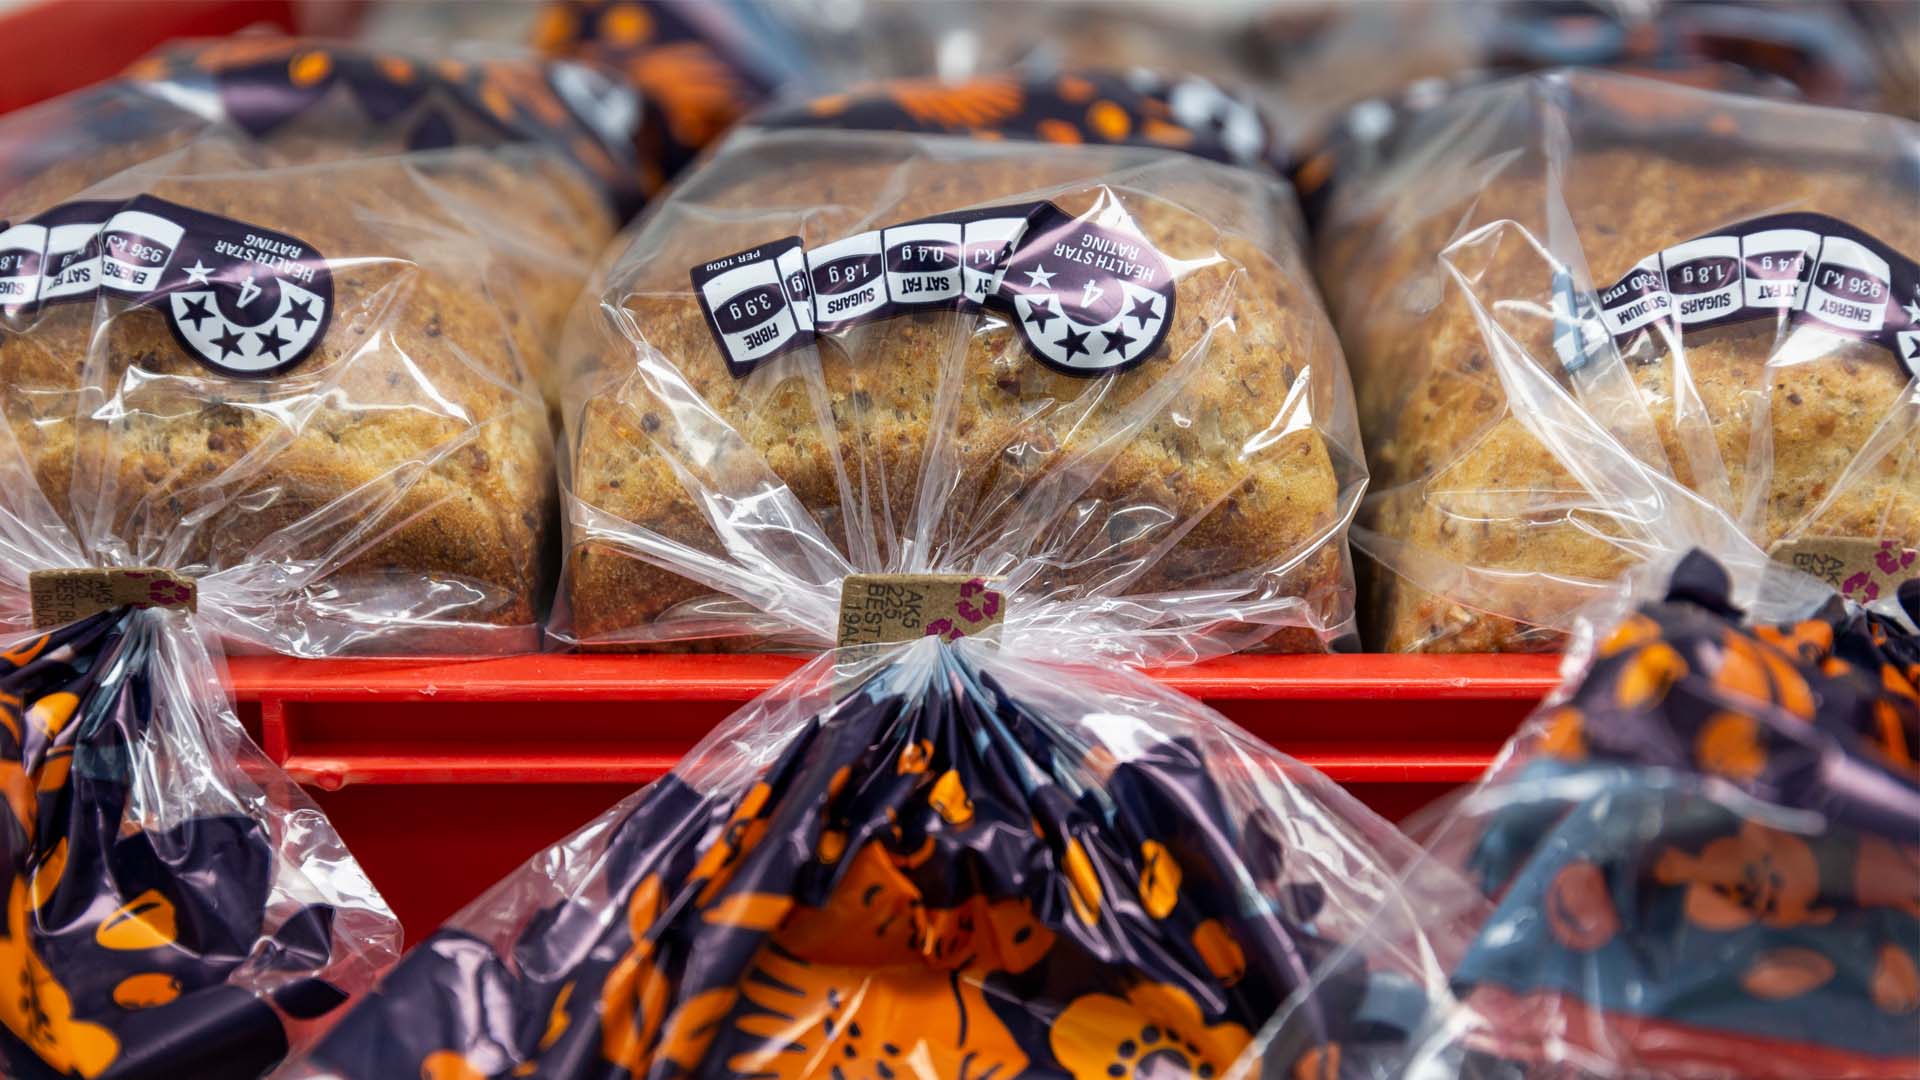 NZ's two biggest bread companies are phasing out plastic bag clips